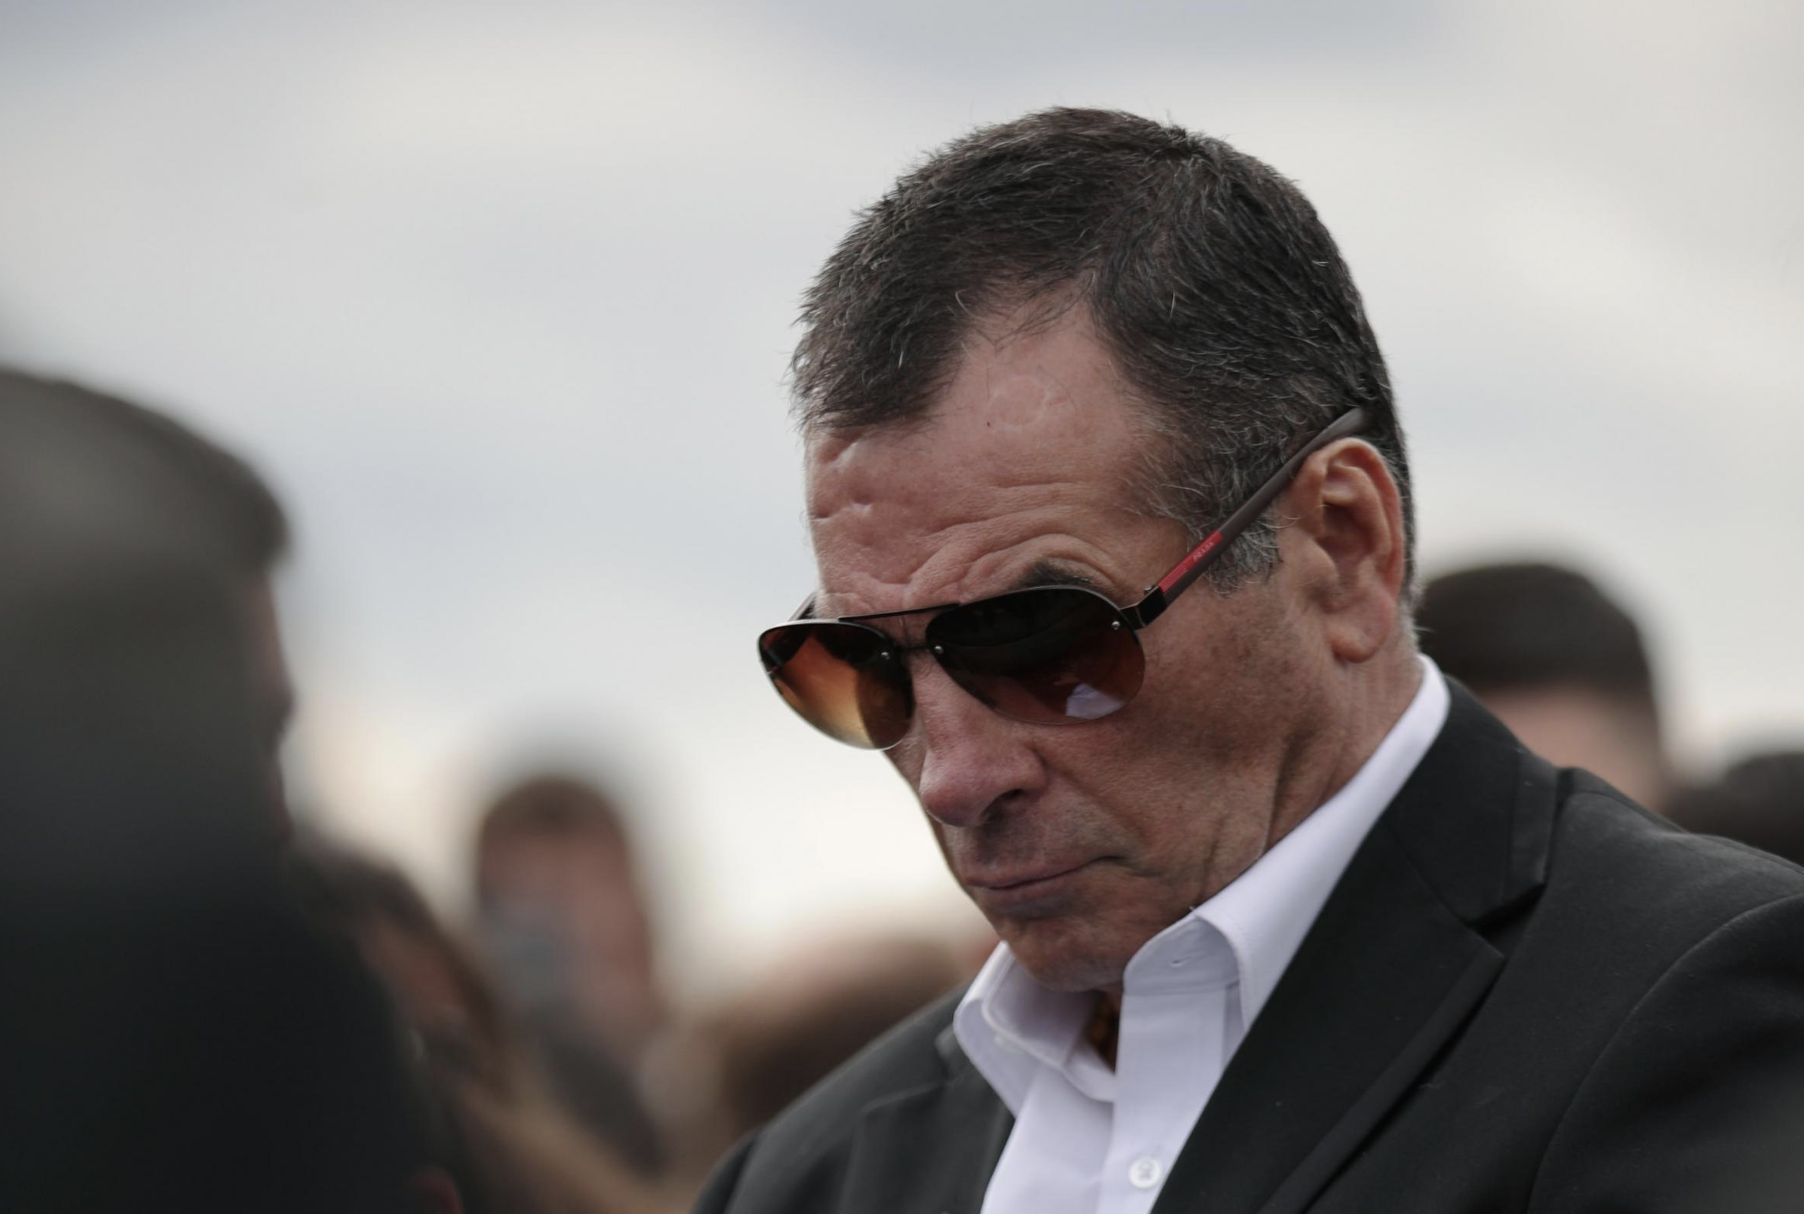 Paddy Doherty Looking Mournful